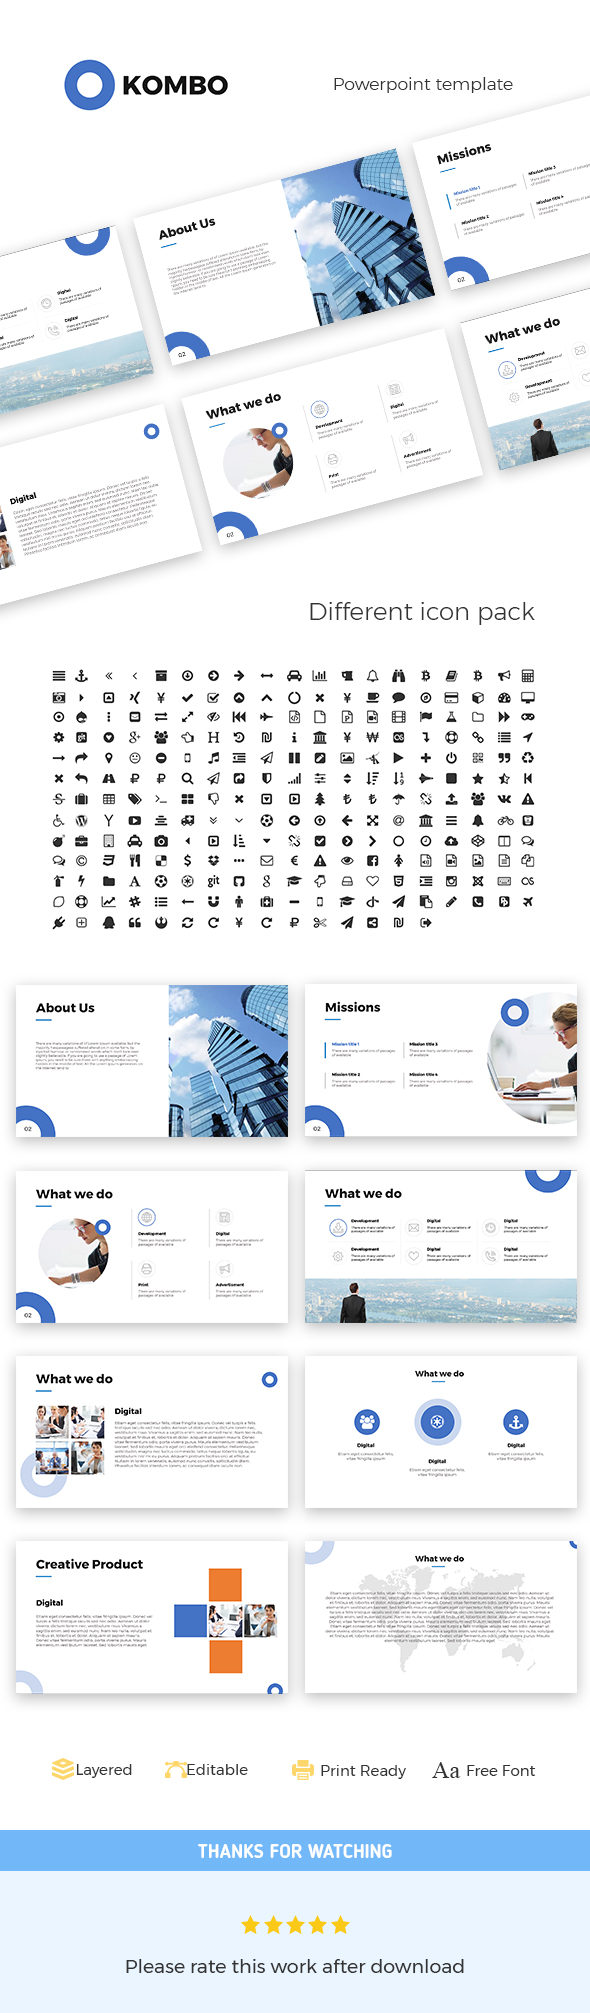 GraphicRiver Kombo Powerpoint Template 20899630